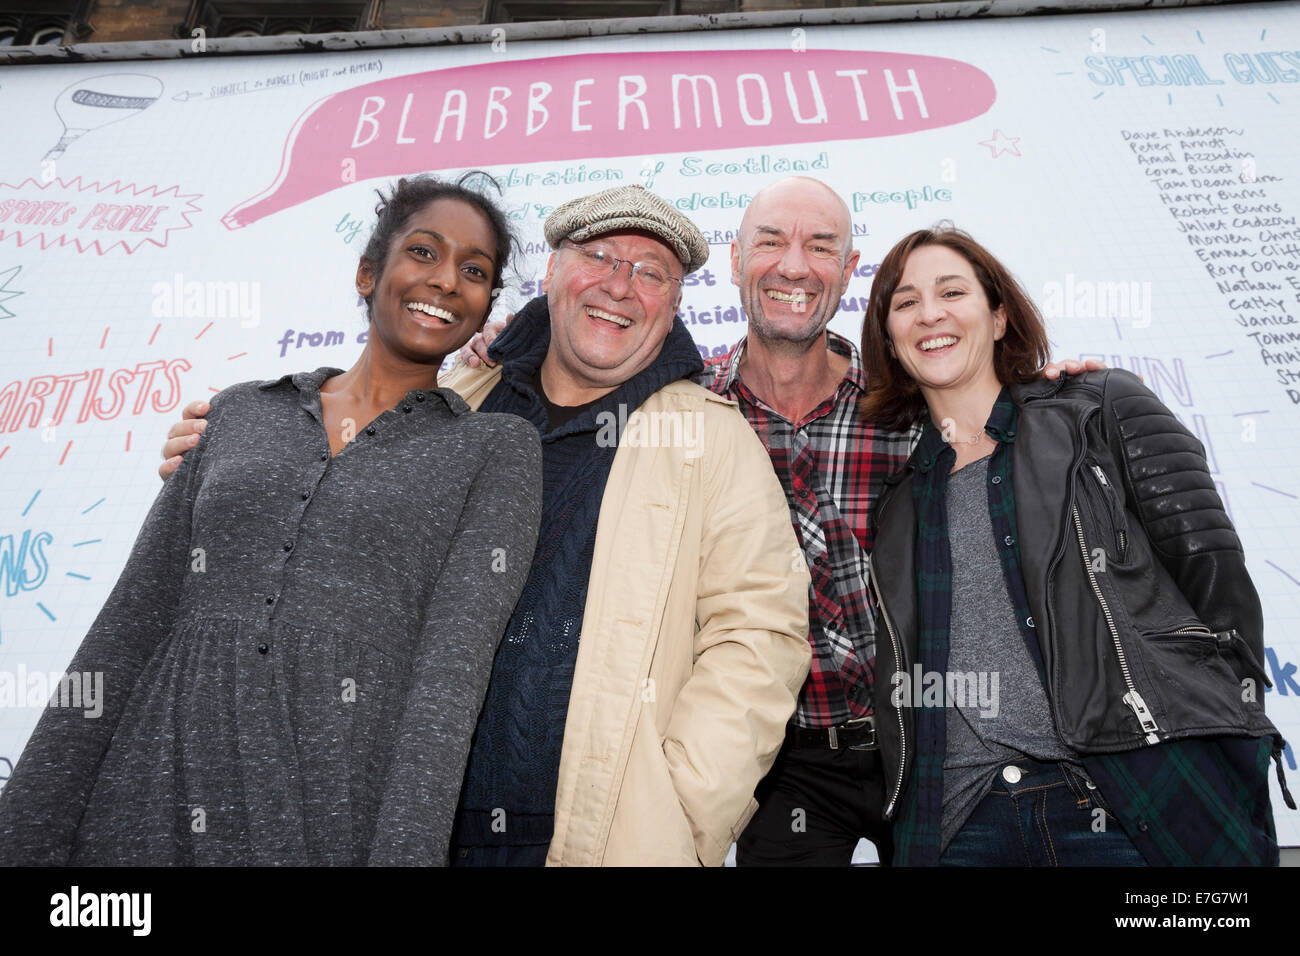 Edinburgh, Scotland, UK. 16th Sep, 2014. Actors, Alex Norton from Taggart (wearing cap), Tam Dean Burn (centre), Morven Christie (BBC2 Twenty Twelve) (right) and Anneika Rose (Taggart) (left) who will be appearing in Blabbermouth at The Assembly Hall on the Mound. Blabbermouth is the 12-hour live event which will take place in Scotland's capital city on the eve of the historic referendum to celebrate the country's contribution to the world through its written word. 16th September 2014. Edinburgh, Scotland, UK Credit:  GARY DOAK/Alamy Live News Stock Photo